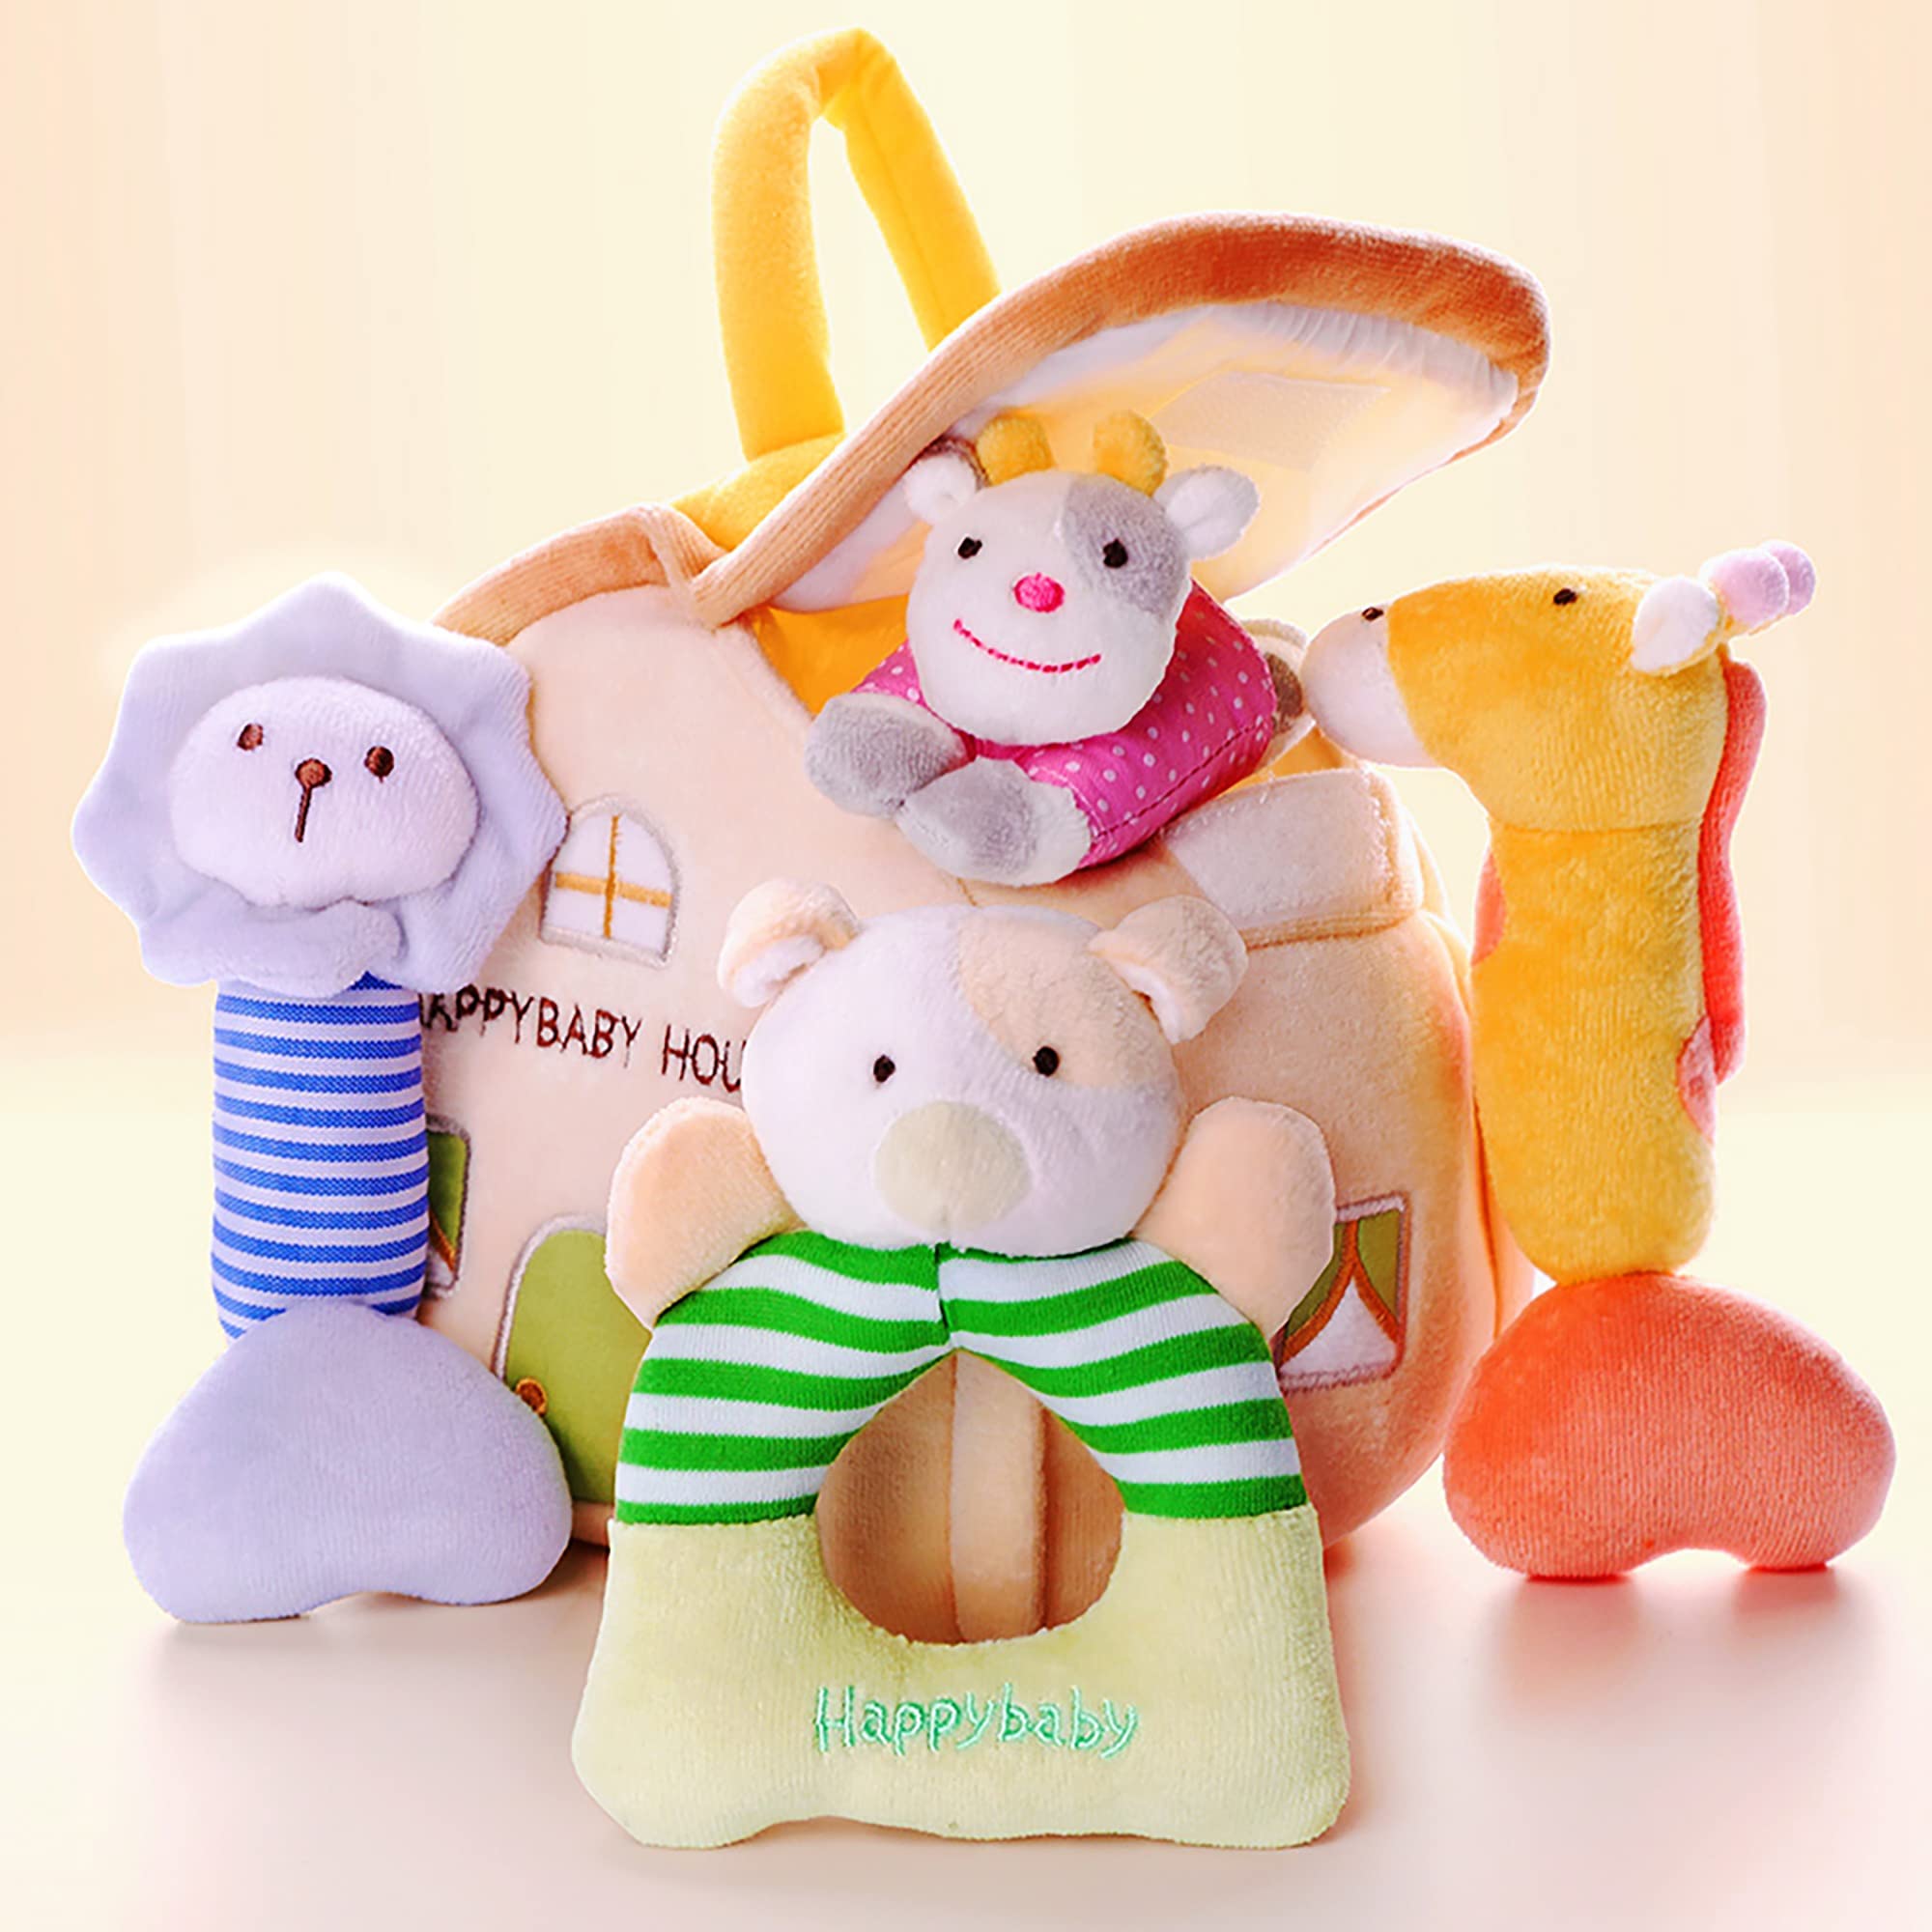 Book Cover iPlay, iLearn 4 Plush Baby Soft Rattle Toys, Hand Grab Sensory Shaker, Farm Stuffed Animal Set, Infant Easter Basket Girls, Unique Newborn Shower Gifts for 2 3 6 9 12 18 Month 1 Year Old Boys Toddlers House